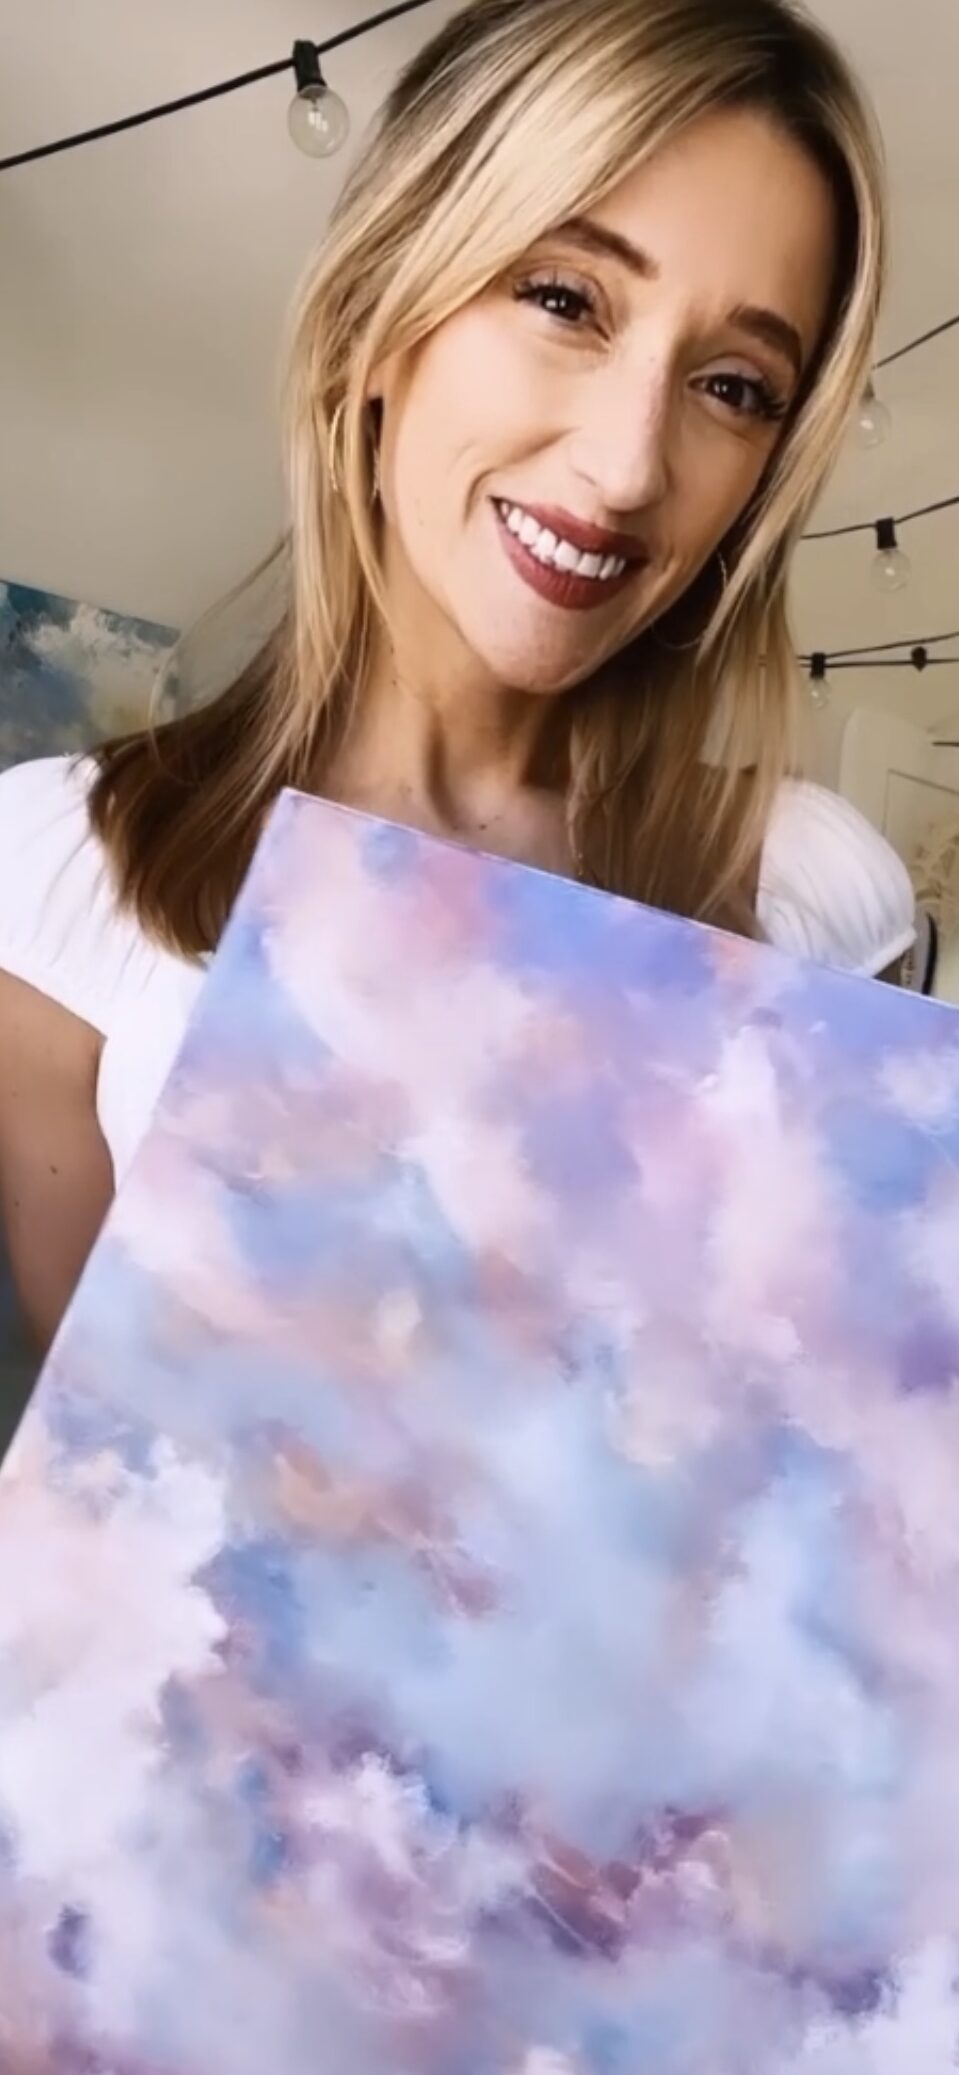 Cloud painting to help overcoming imposter syndrome for artists